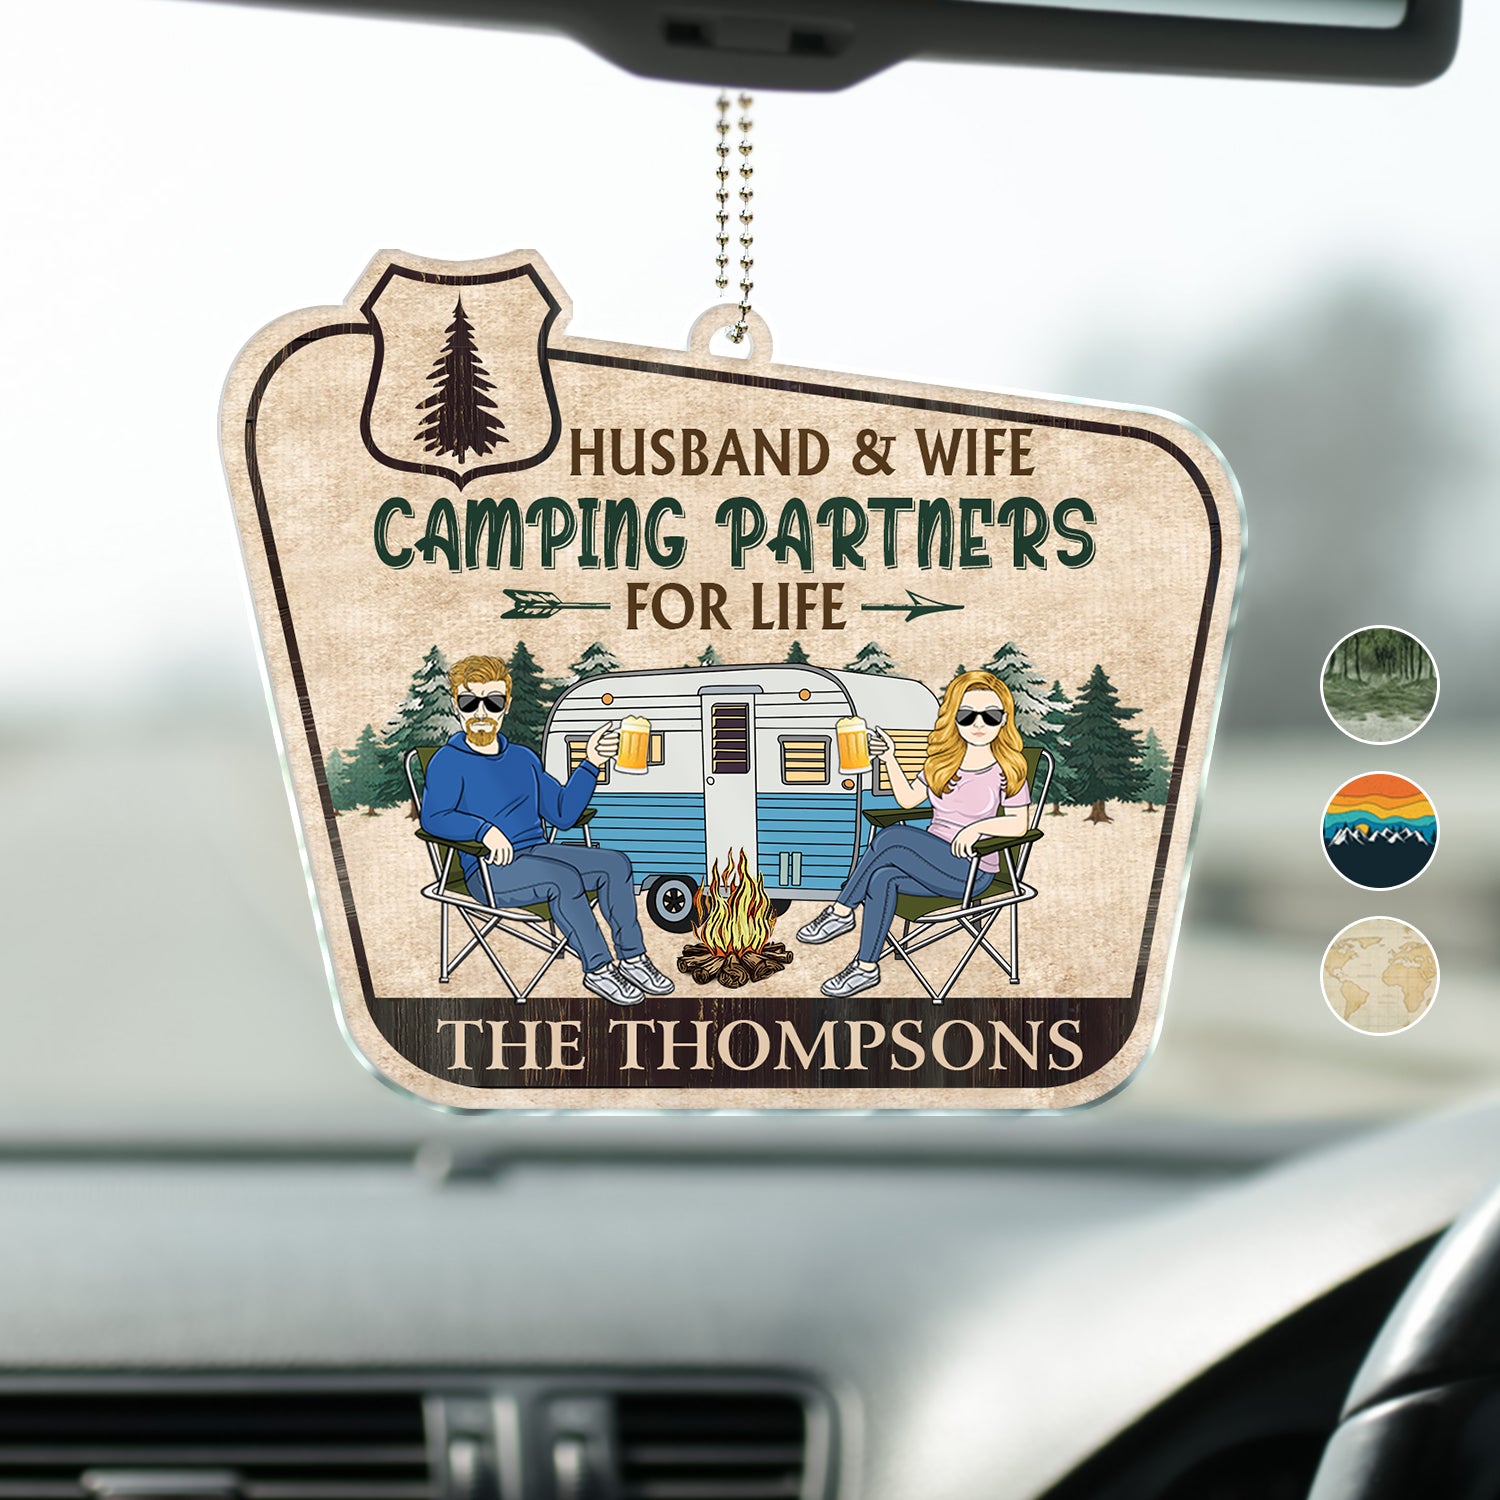 Camping Couple Husband & Wife Camping Partners For Life - Anniversary, Vacation, Funny Gift For Campers - Personalized Acrylic Car Hanger